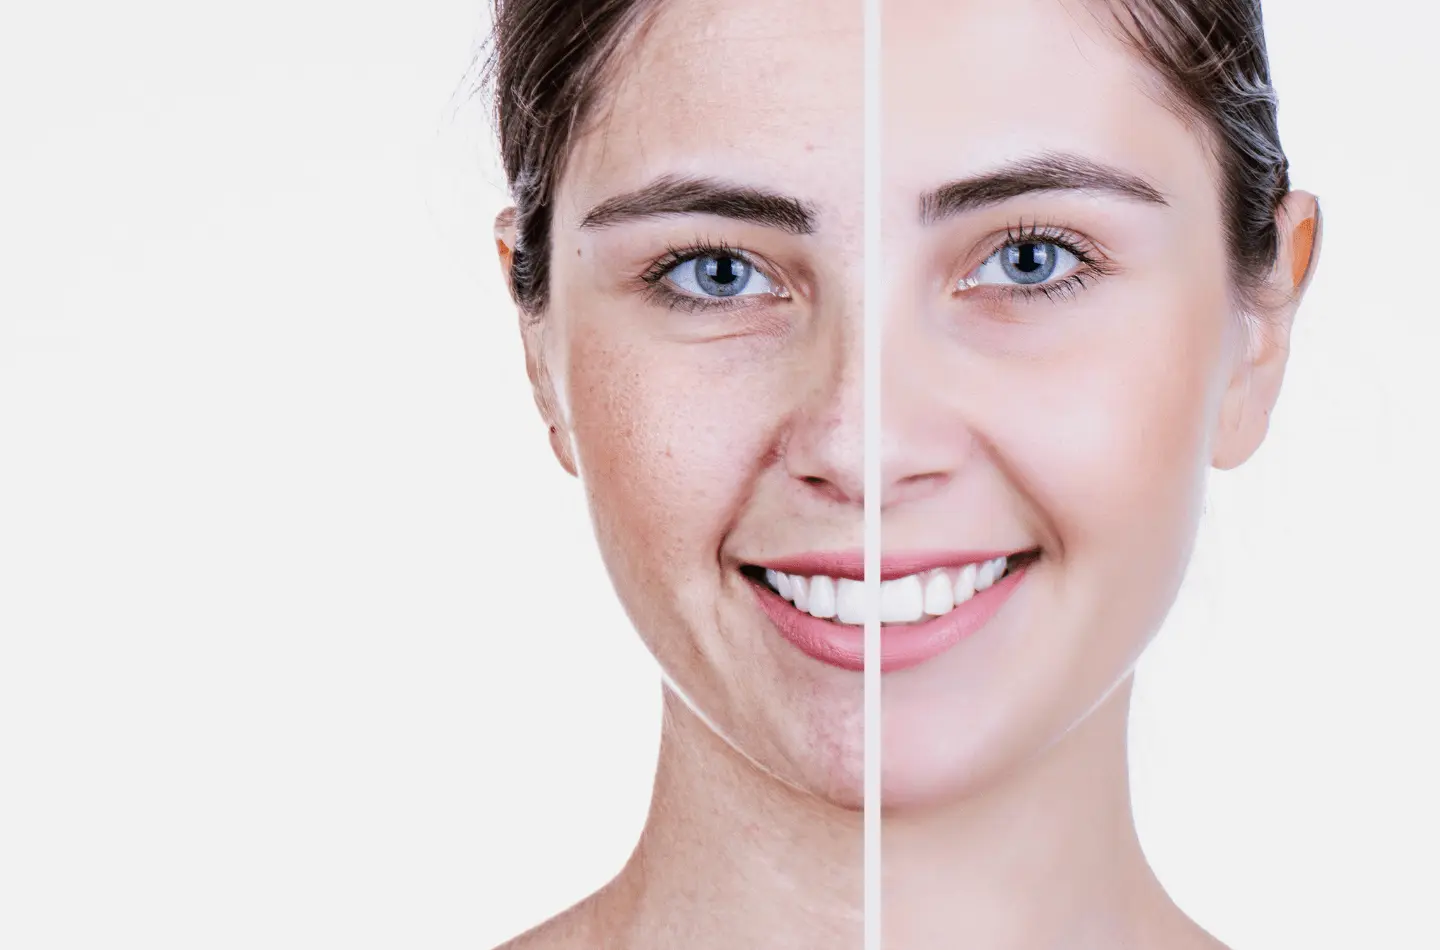 11 Anti-aging secrets every woman must know